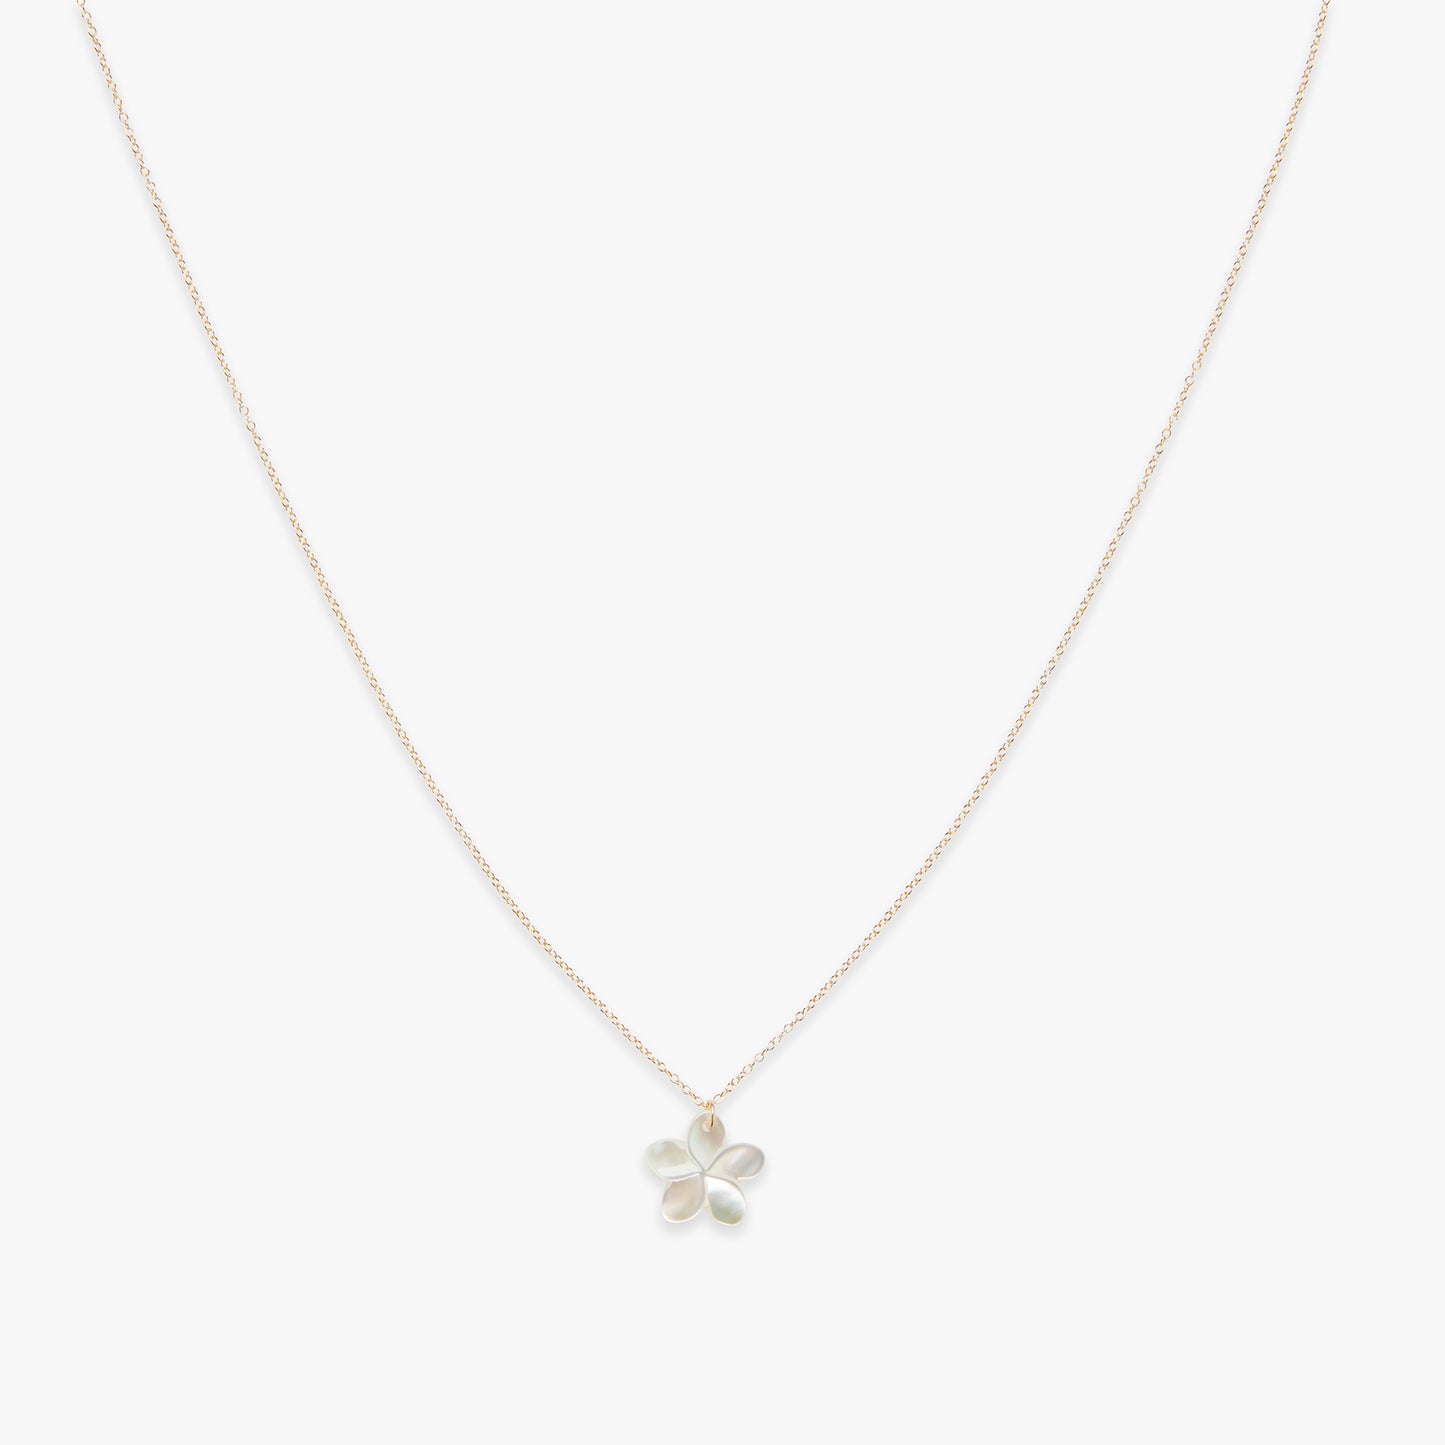 Plumeria 2.0 necklace gold filled